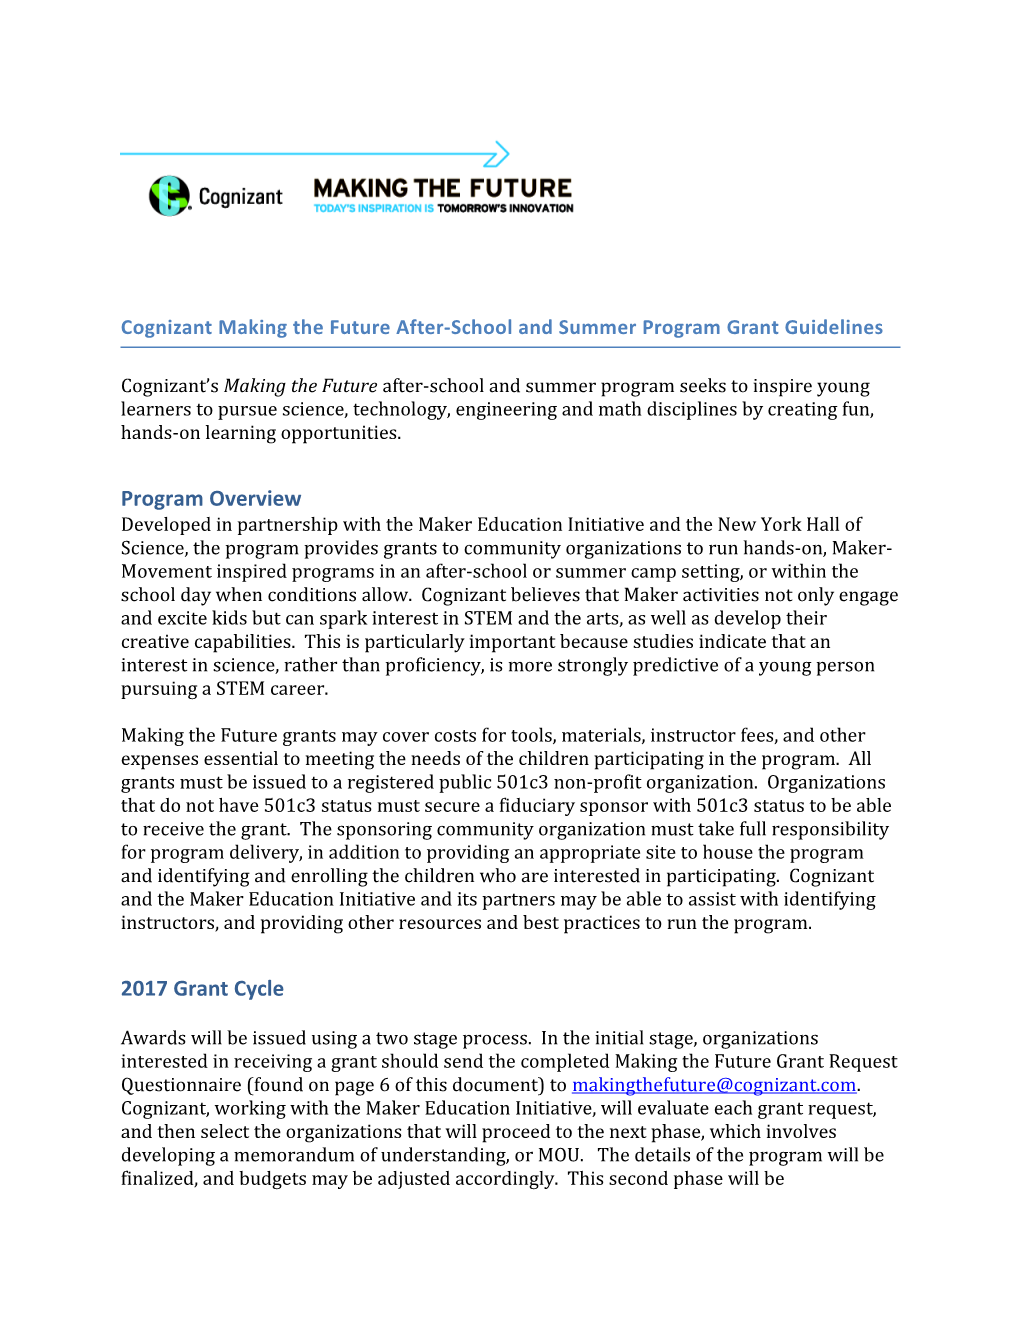 Cognizant Making the Future After-School and Summer Program Grant Guidelines